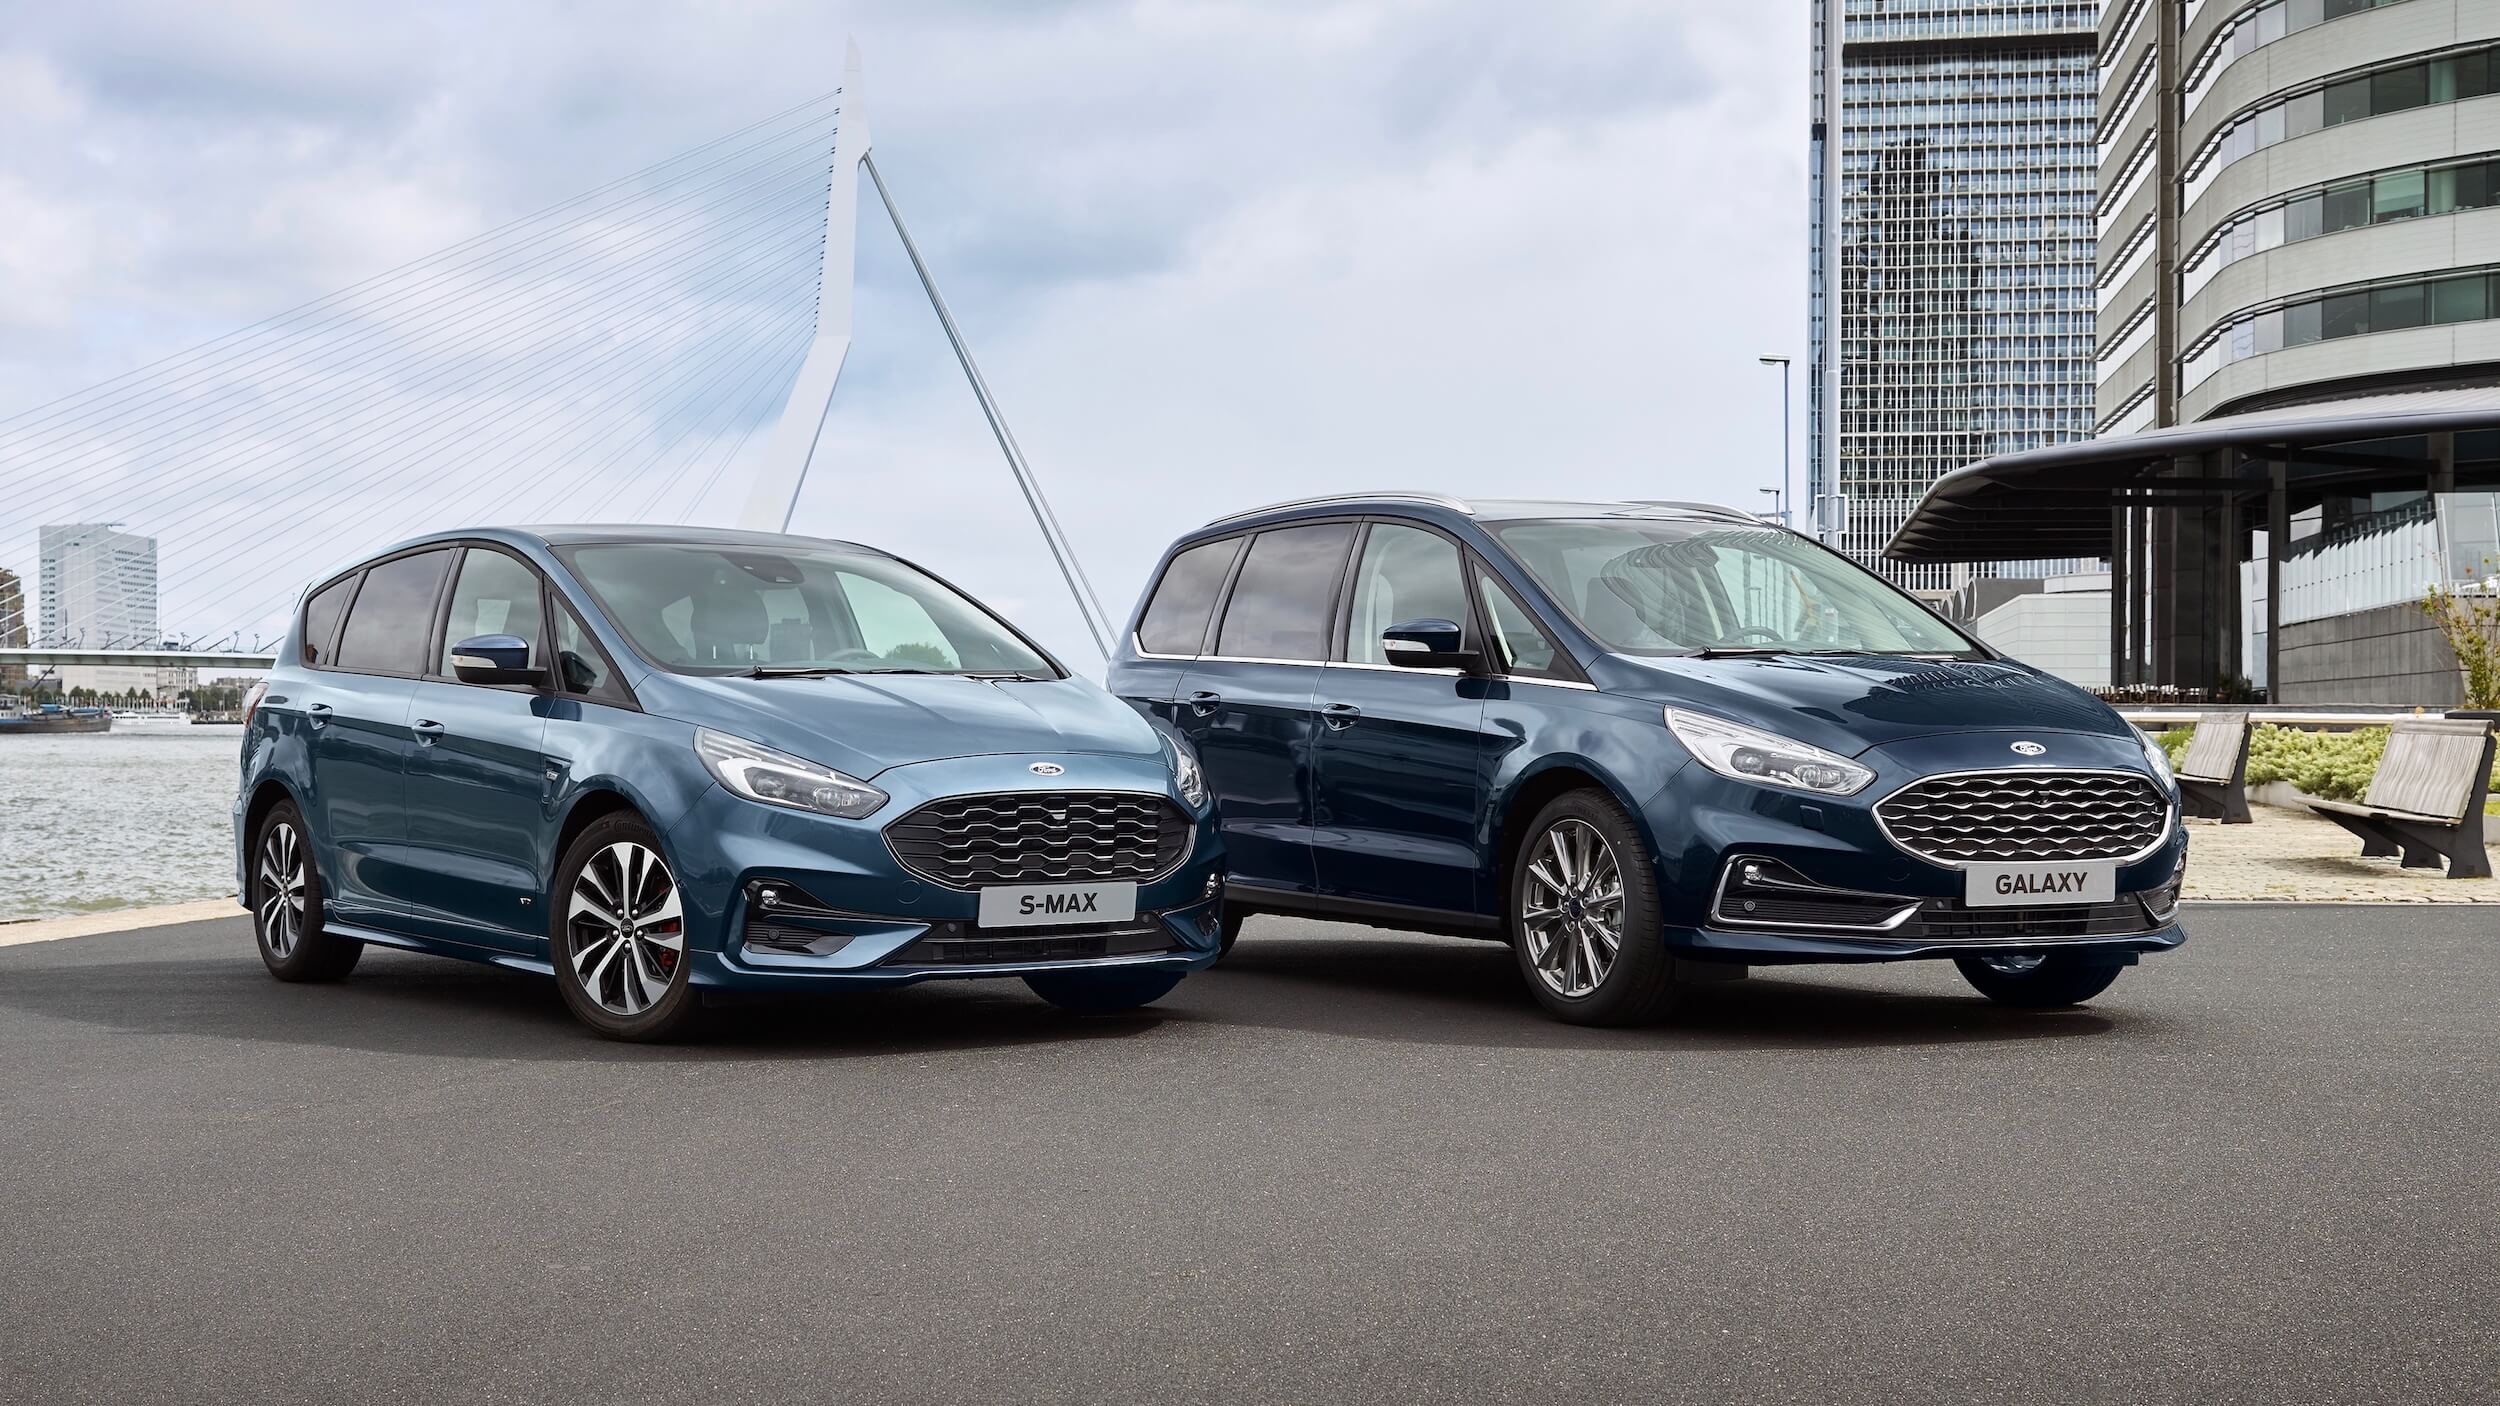 Ford S Max versus Galaxy